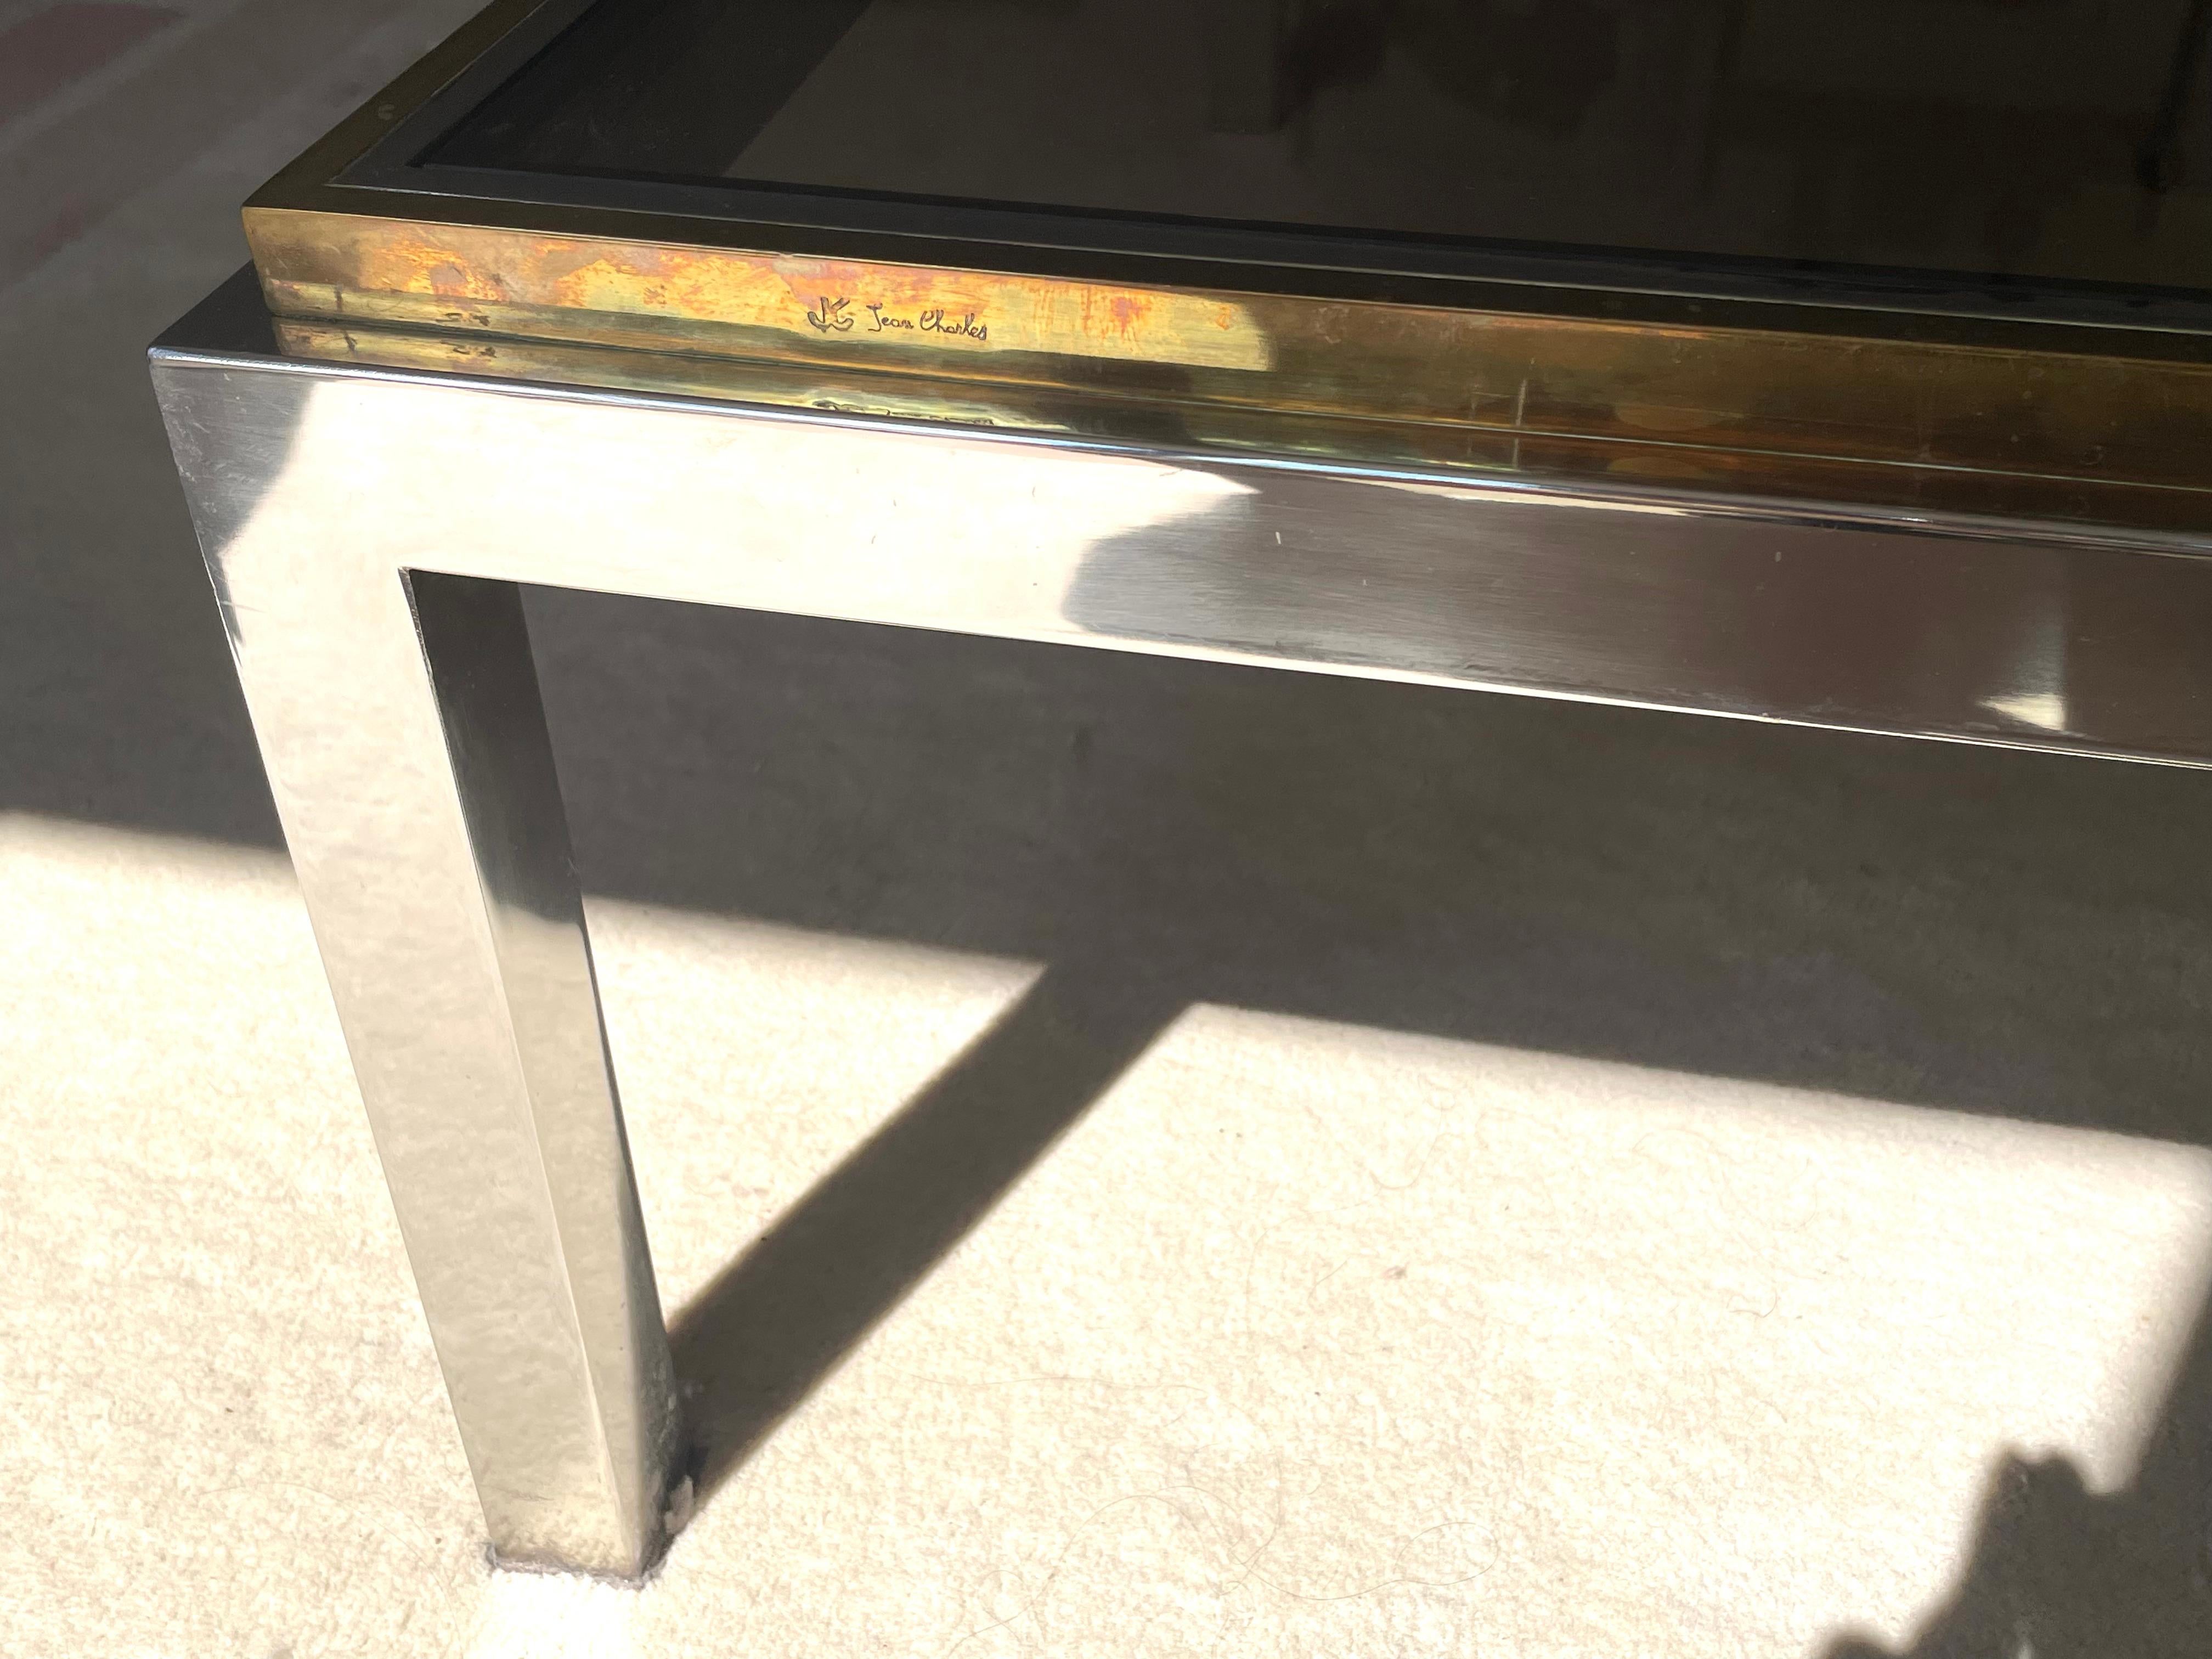 Low table by Willy Rizzo - model Flaminia -circa 1970 For Sale 2